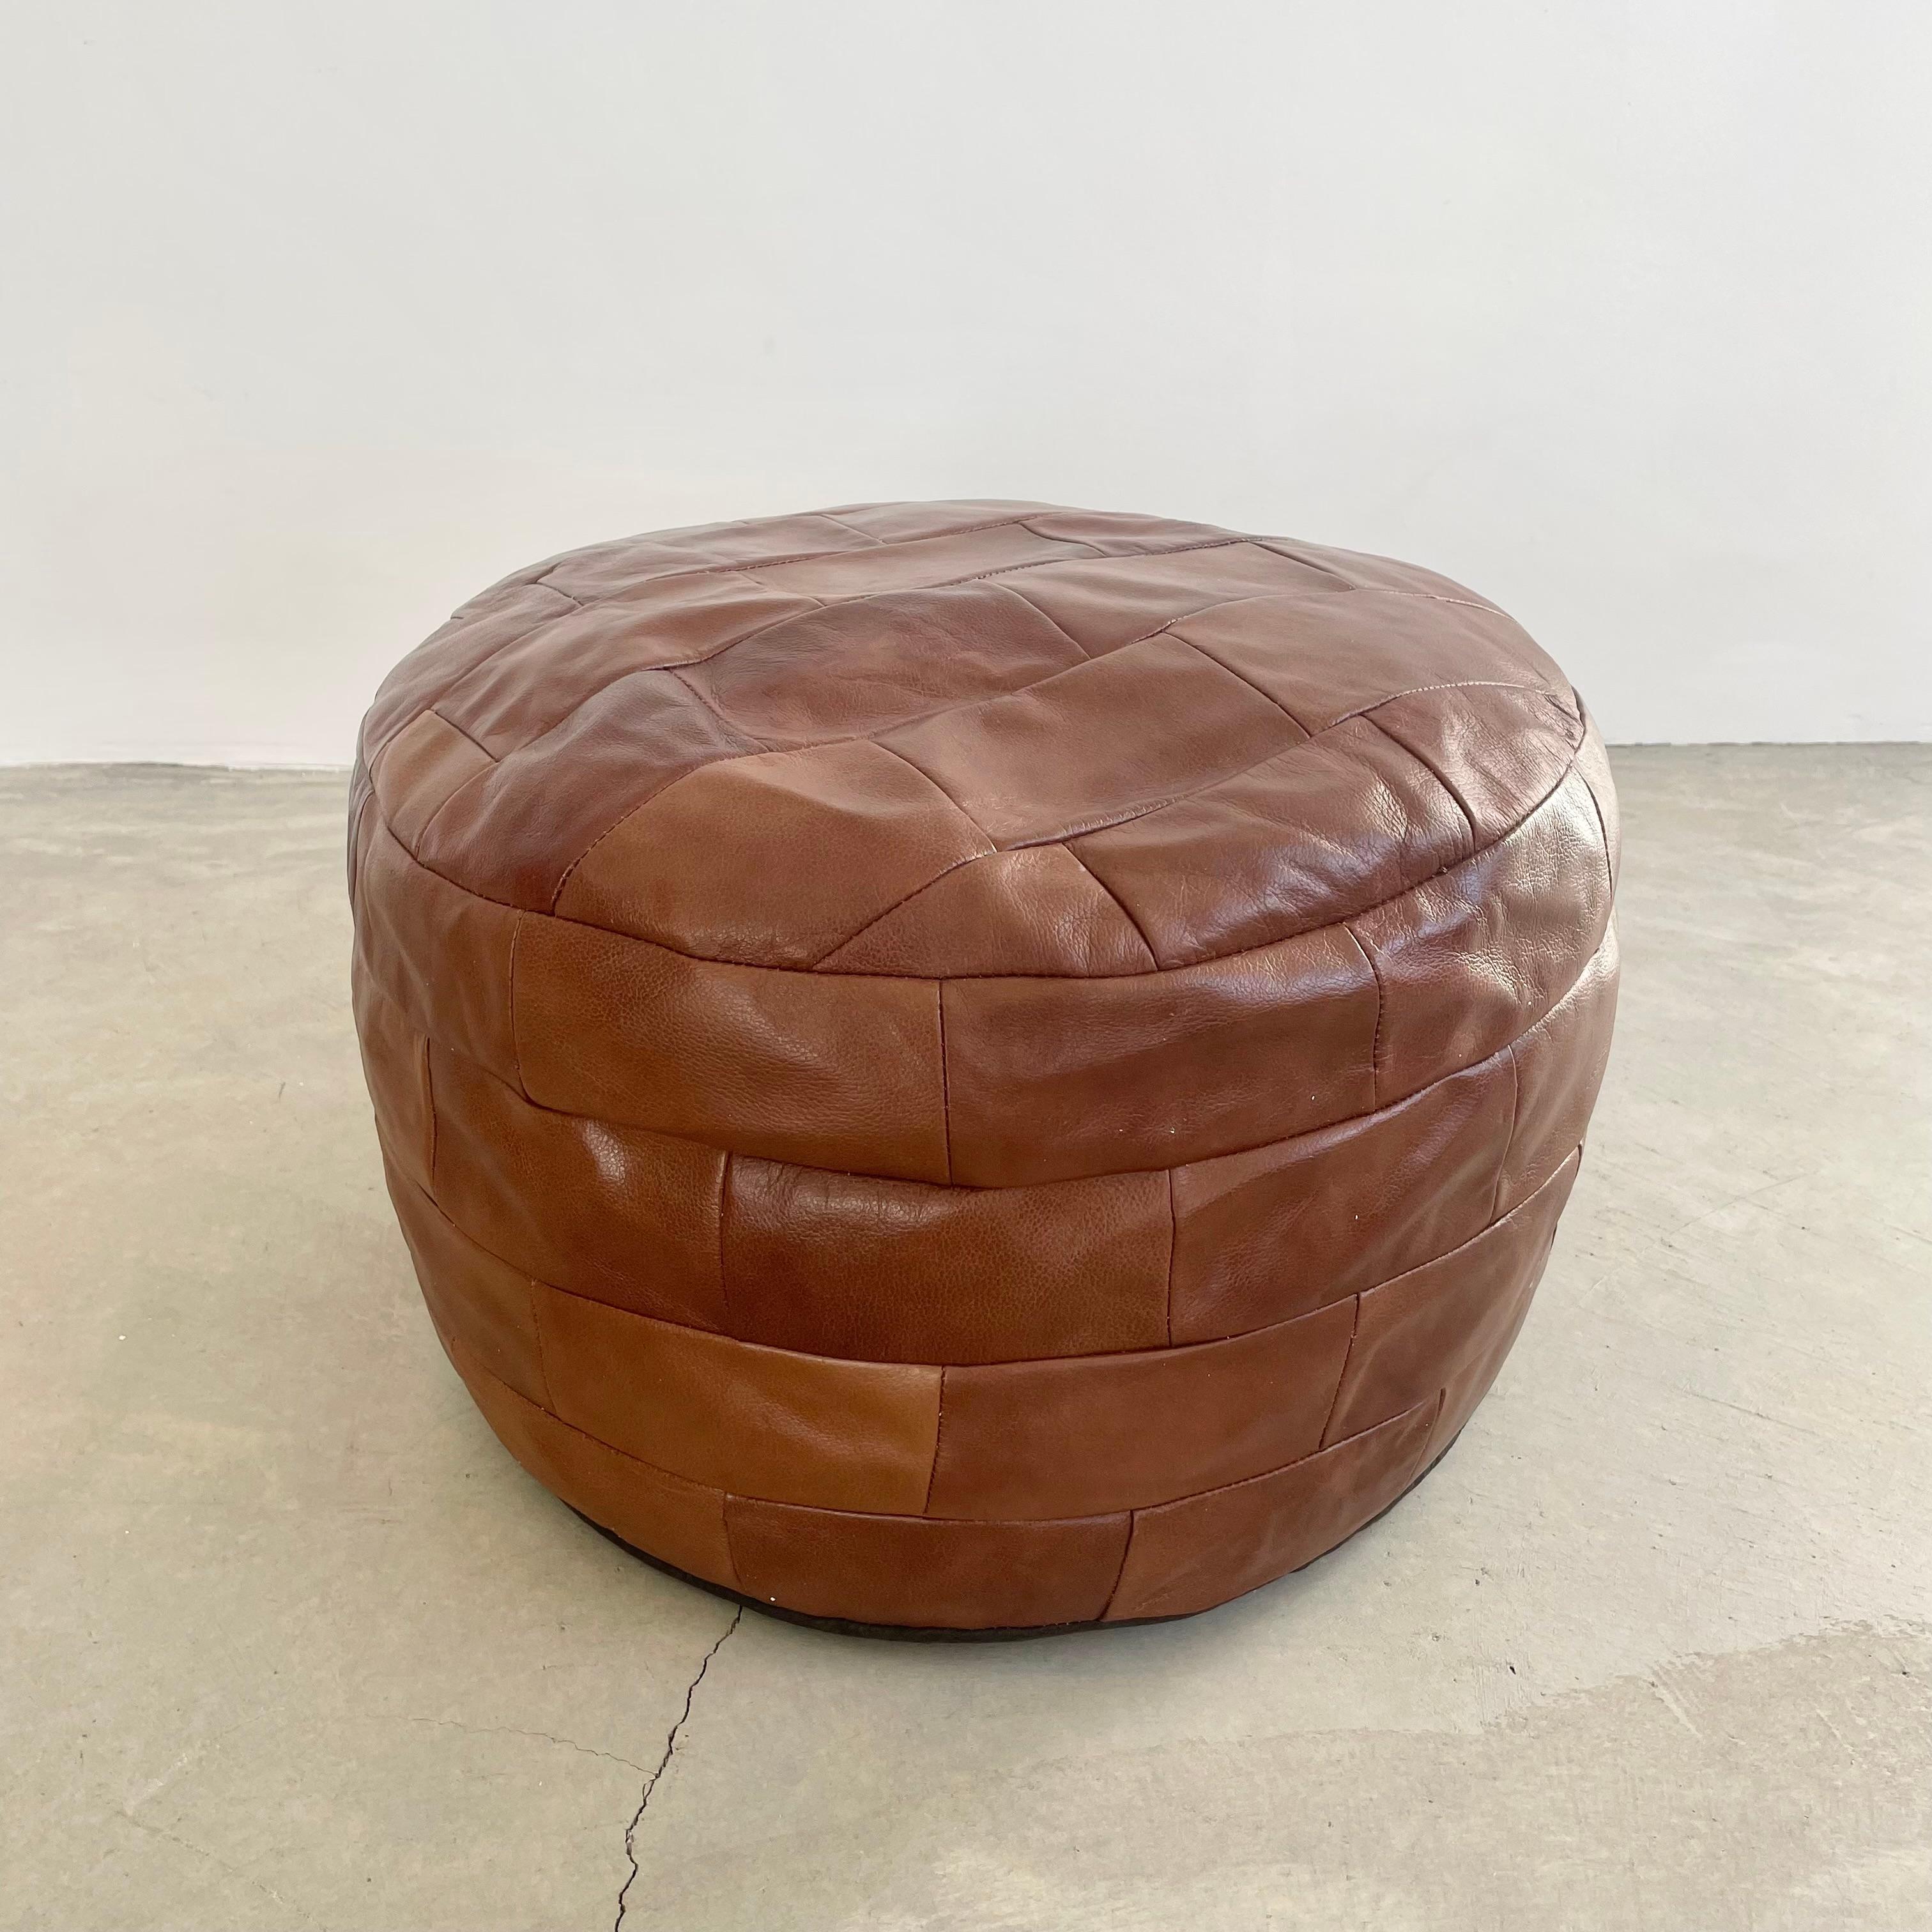 Classy and chic cognac leather pouf/ottoman by Swiss designer De Sede with square patchwork. Handmade with wonderful faded patina or varying hues of browns. Gorgeous accent piece. Good vintage condition. Wear appropriate with age. Brand new filler.